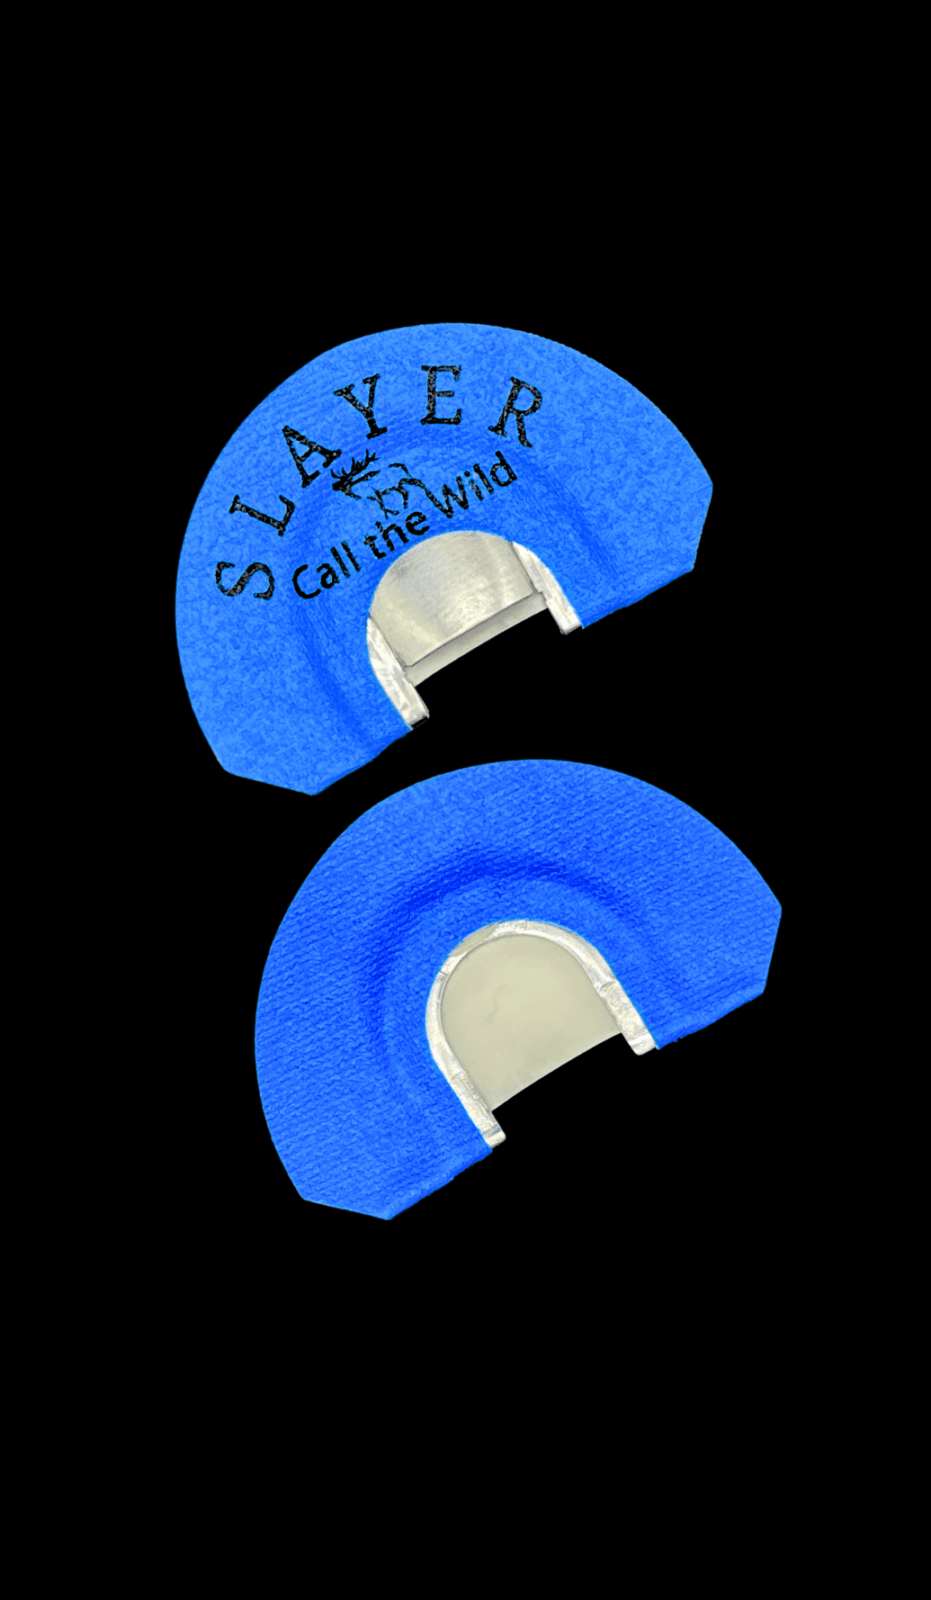 Selway Elk Reed from the Clearwater Diaphragm Series, light blue tape, natural latex